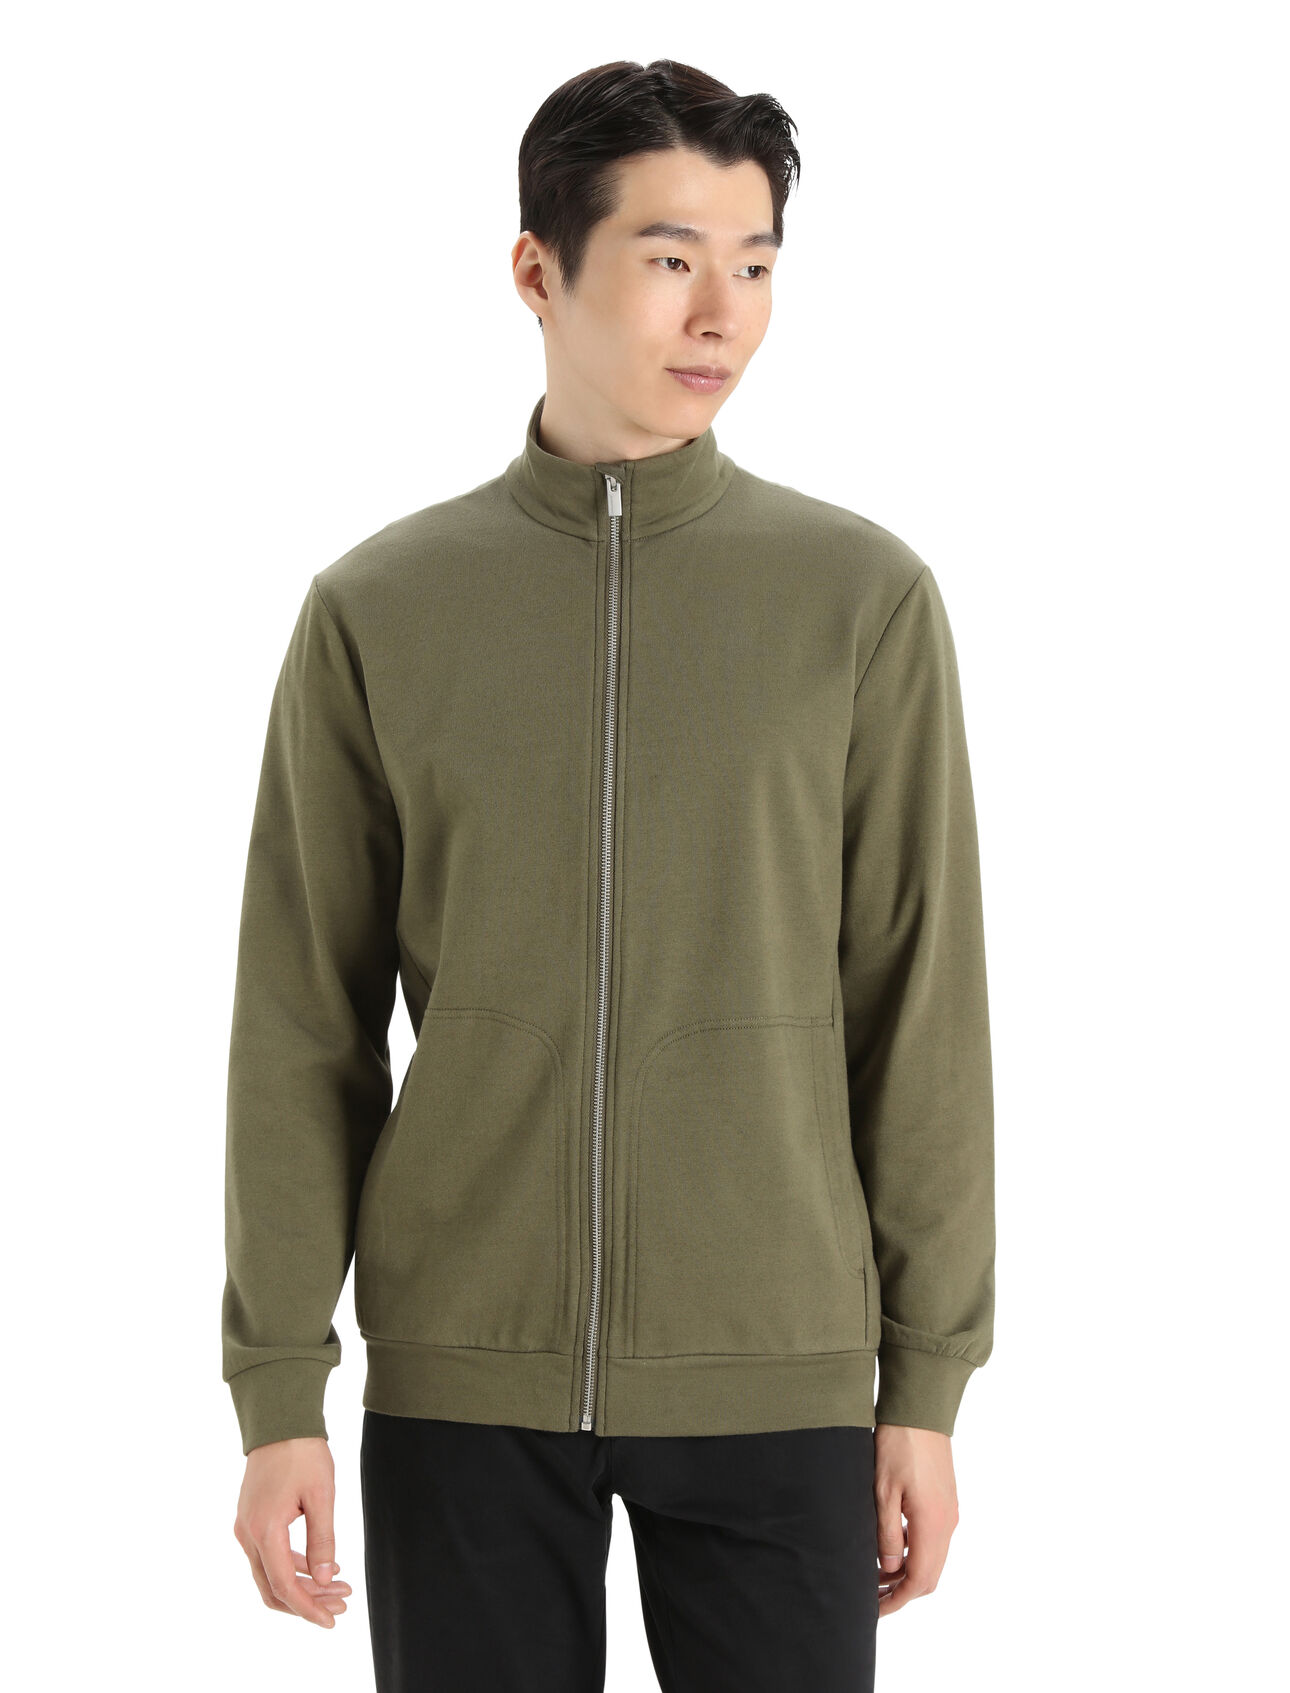 Mens Merino Central II Long Sleeve Zip A versatile, everyday sweatshirt that goes anywhere in comfort, the Central II Long Sleeve Zip features a sustainable blend of natural merino wool and soft organic cotton.